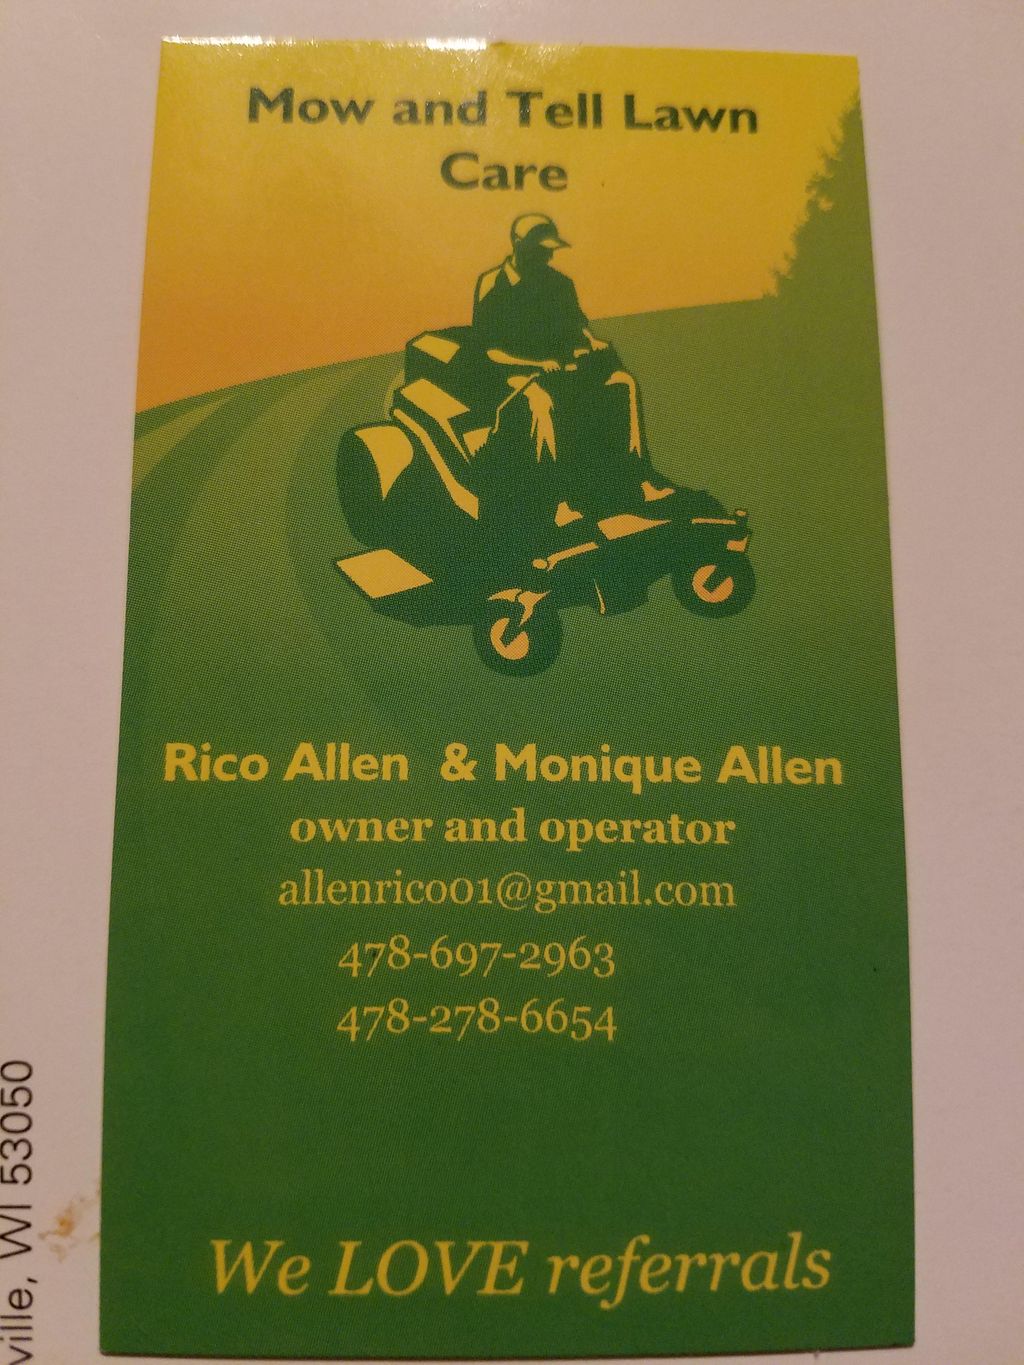 Mow and Tell Lawn Care